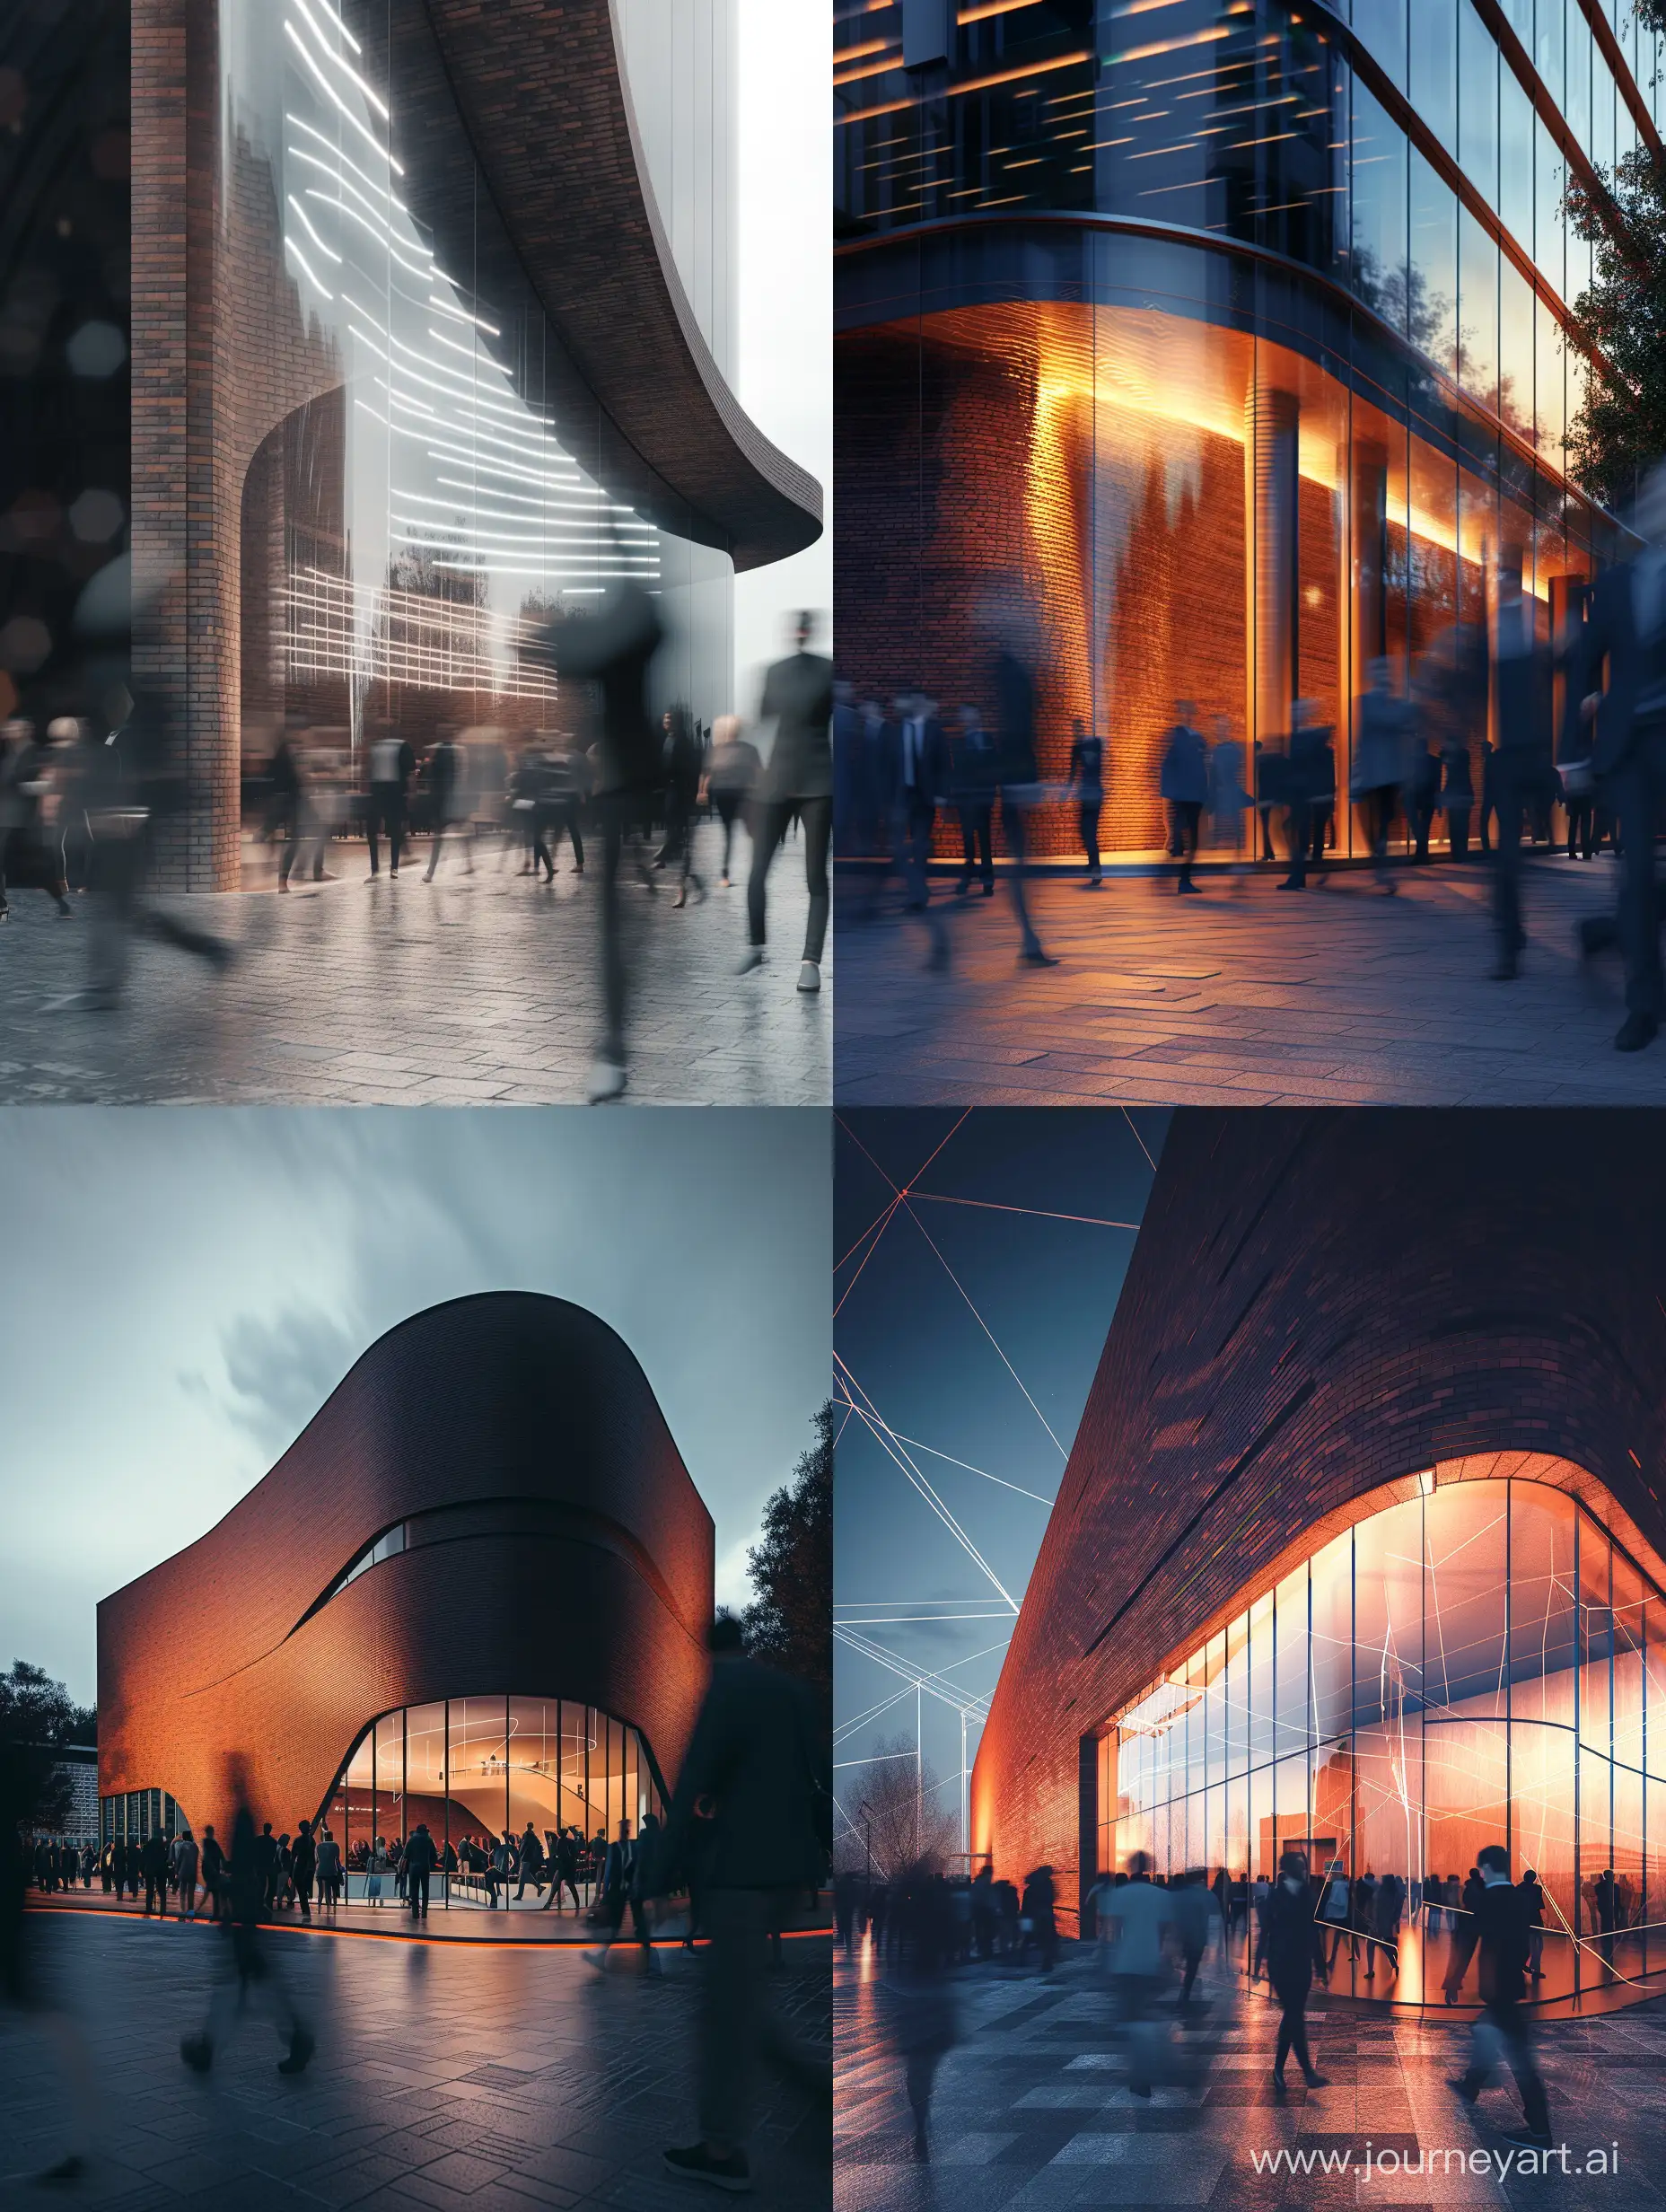 Dramatic-Lighting-in-Photorealistic-Canon-EOS-5D-Image-of-a-Minimalistic-Medium-Scale-Office-Building-with-Curved-Brick-Outline-and-Walking-Crowd